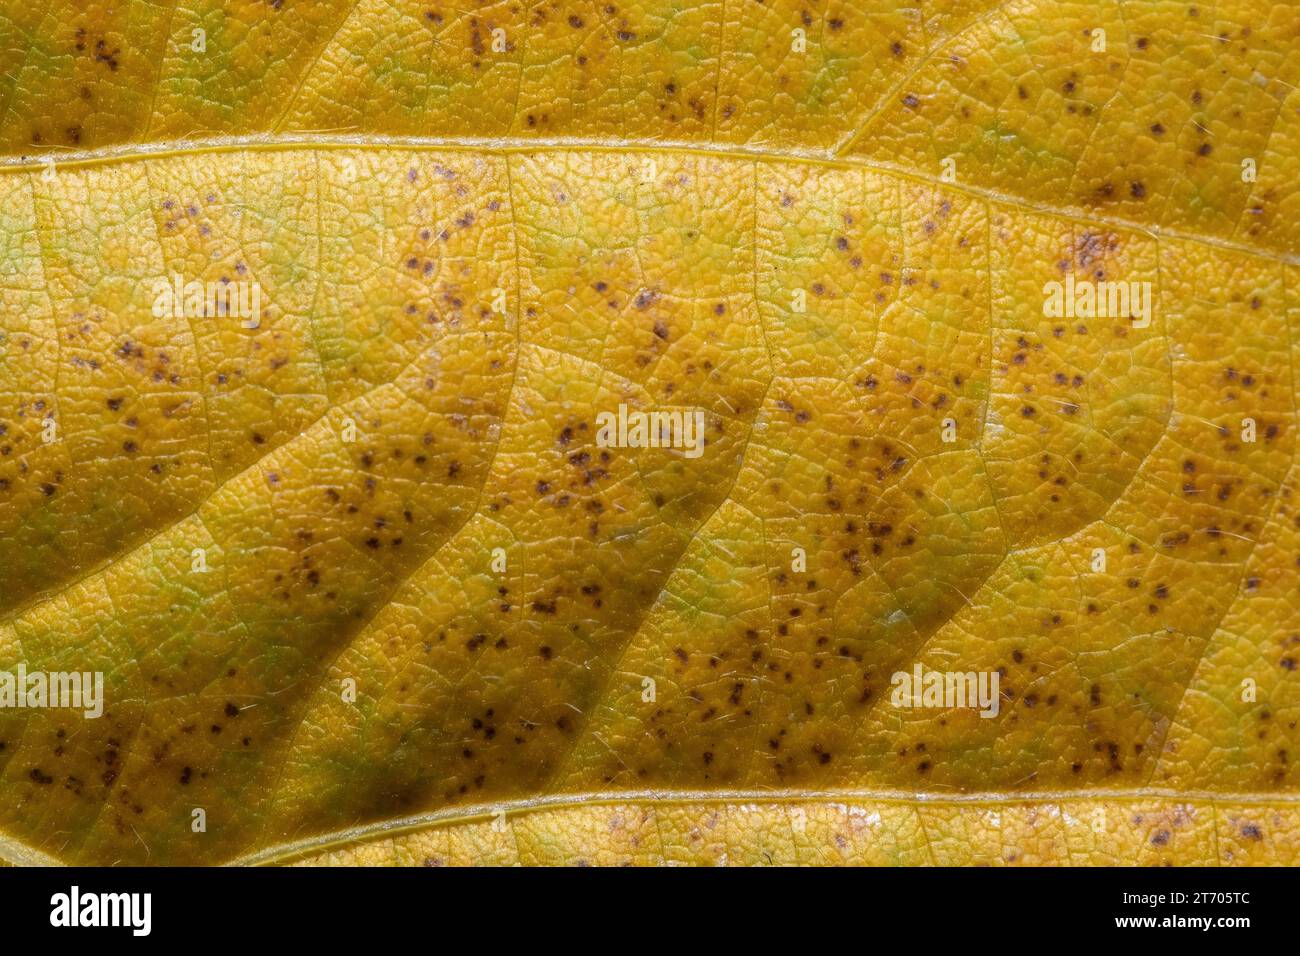 Yellow organic background from a senescing soybean leaf, inidicating autumn has arrived. Stock Photo